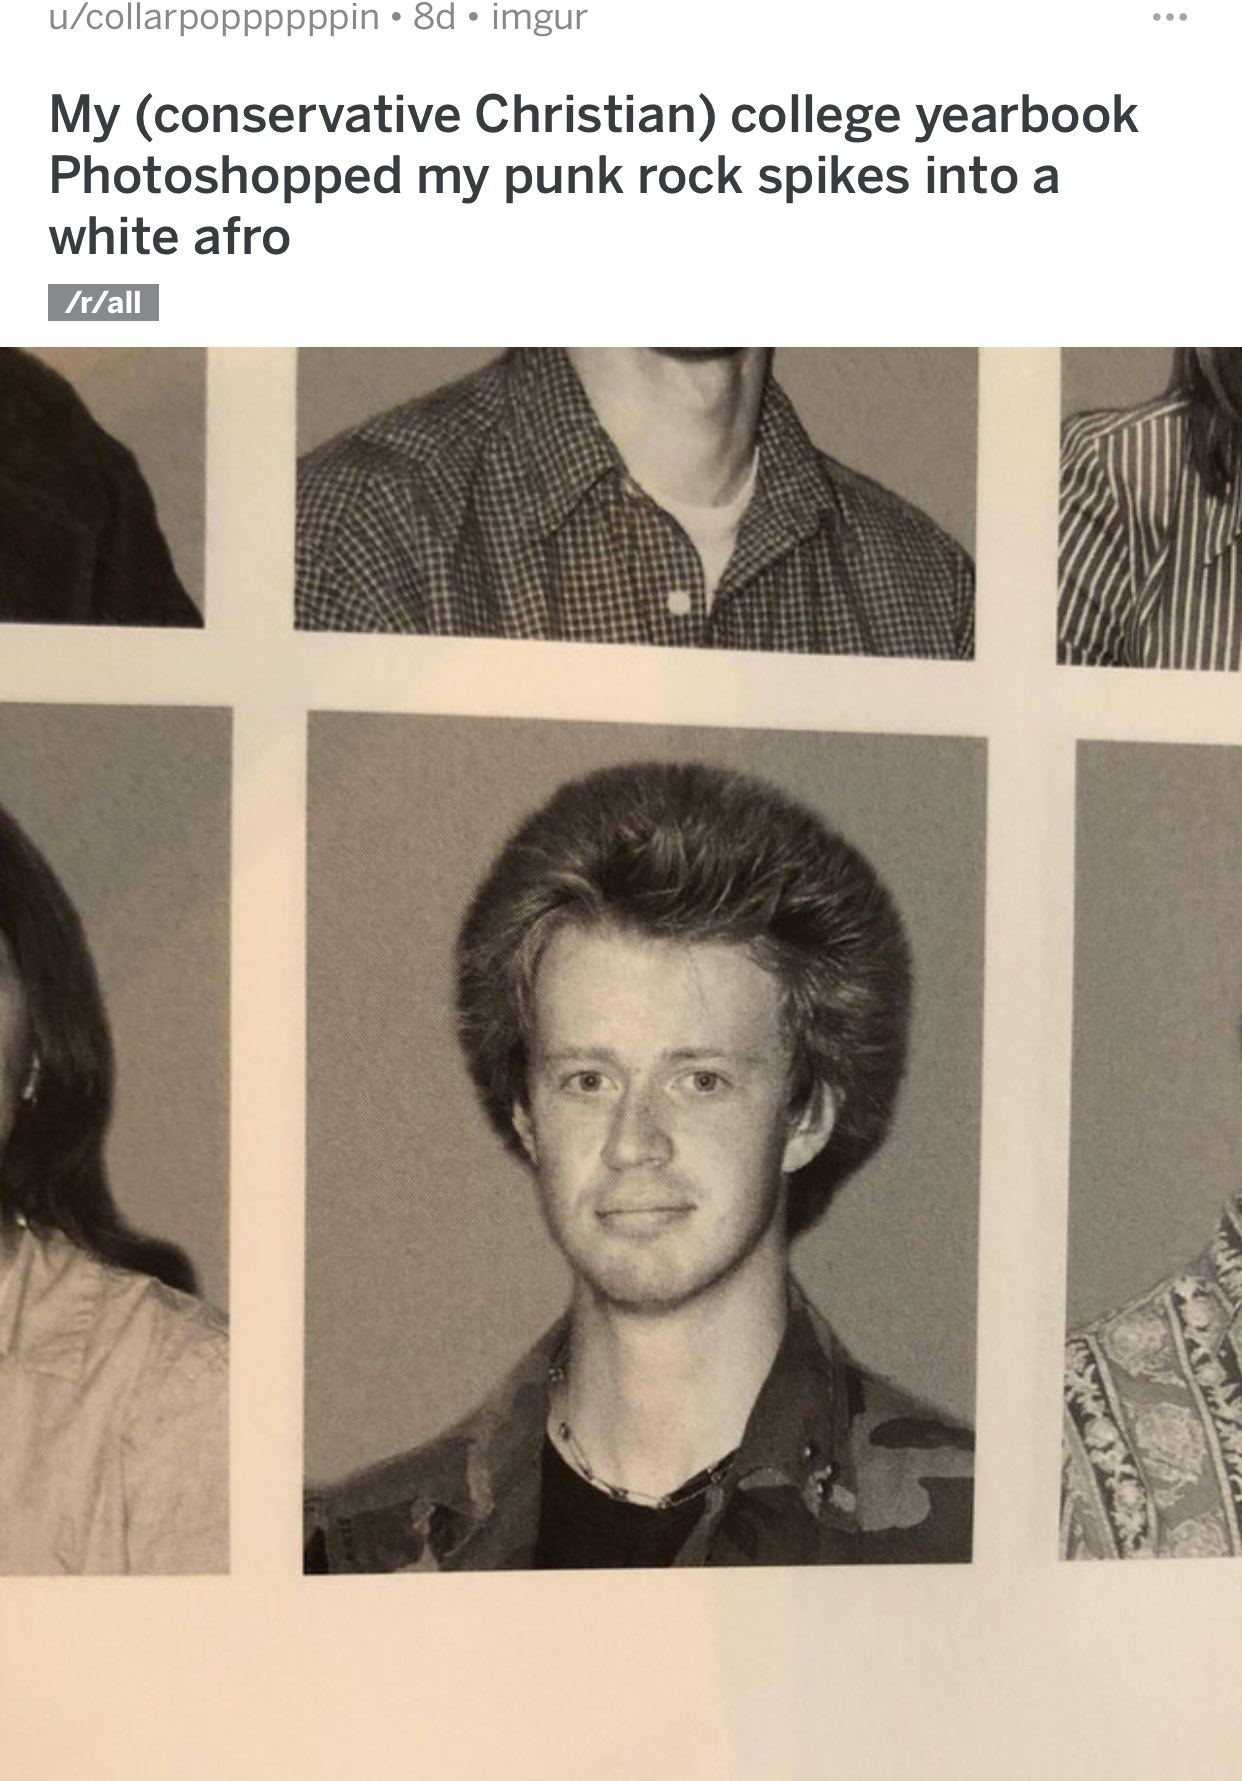 punk yearbook - ucollarpoppppppin 8d imgur My conservative Christian college yearbook Photoshopped my punk rock spikes into a white afro rall